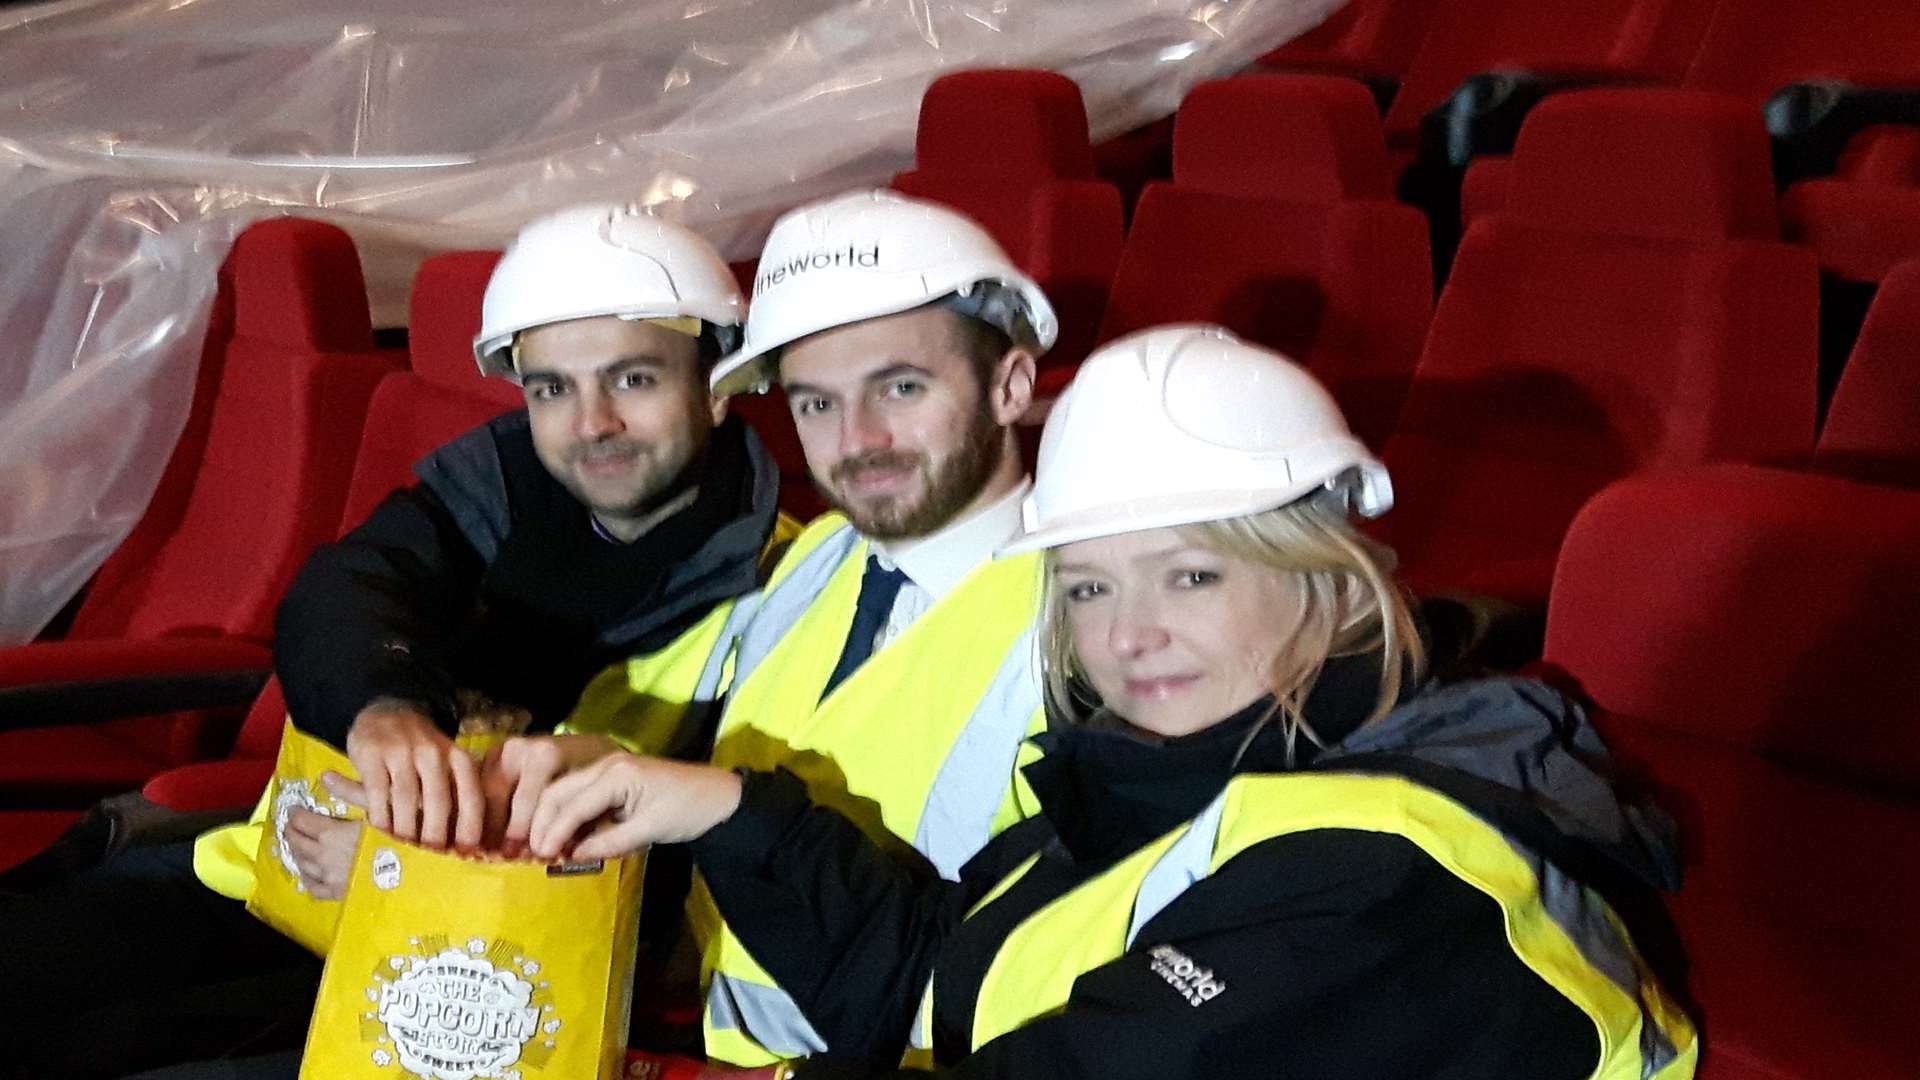 Leading Cineworld team members at Dover. From left regional manager Iman Fathi, general manager Luke Admans and operations director Kelly Drew